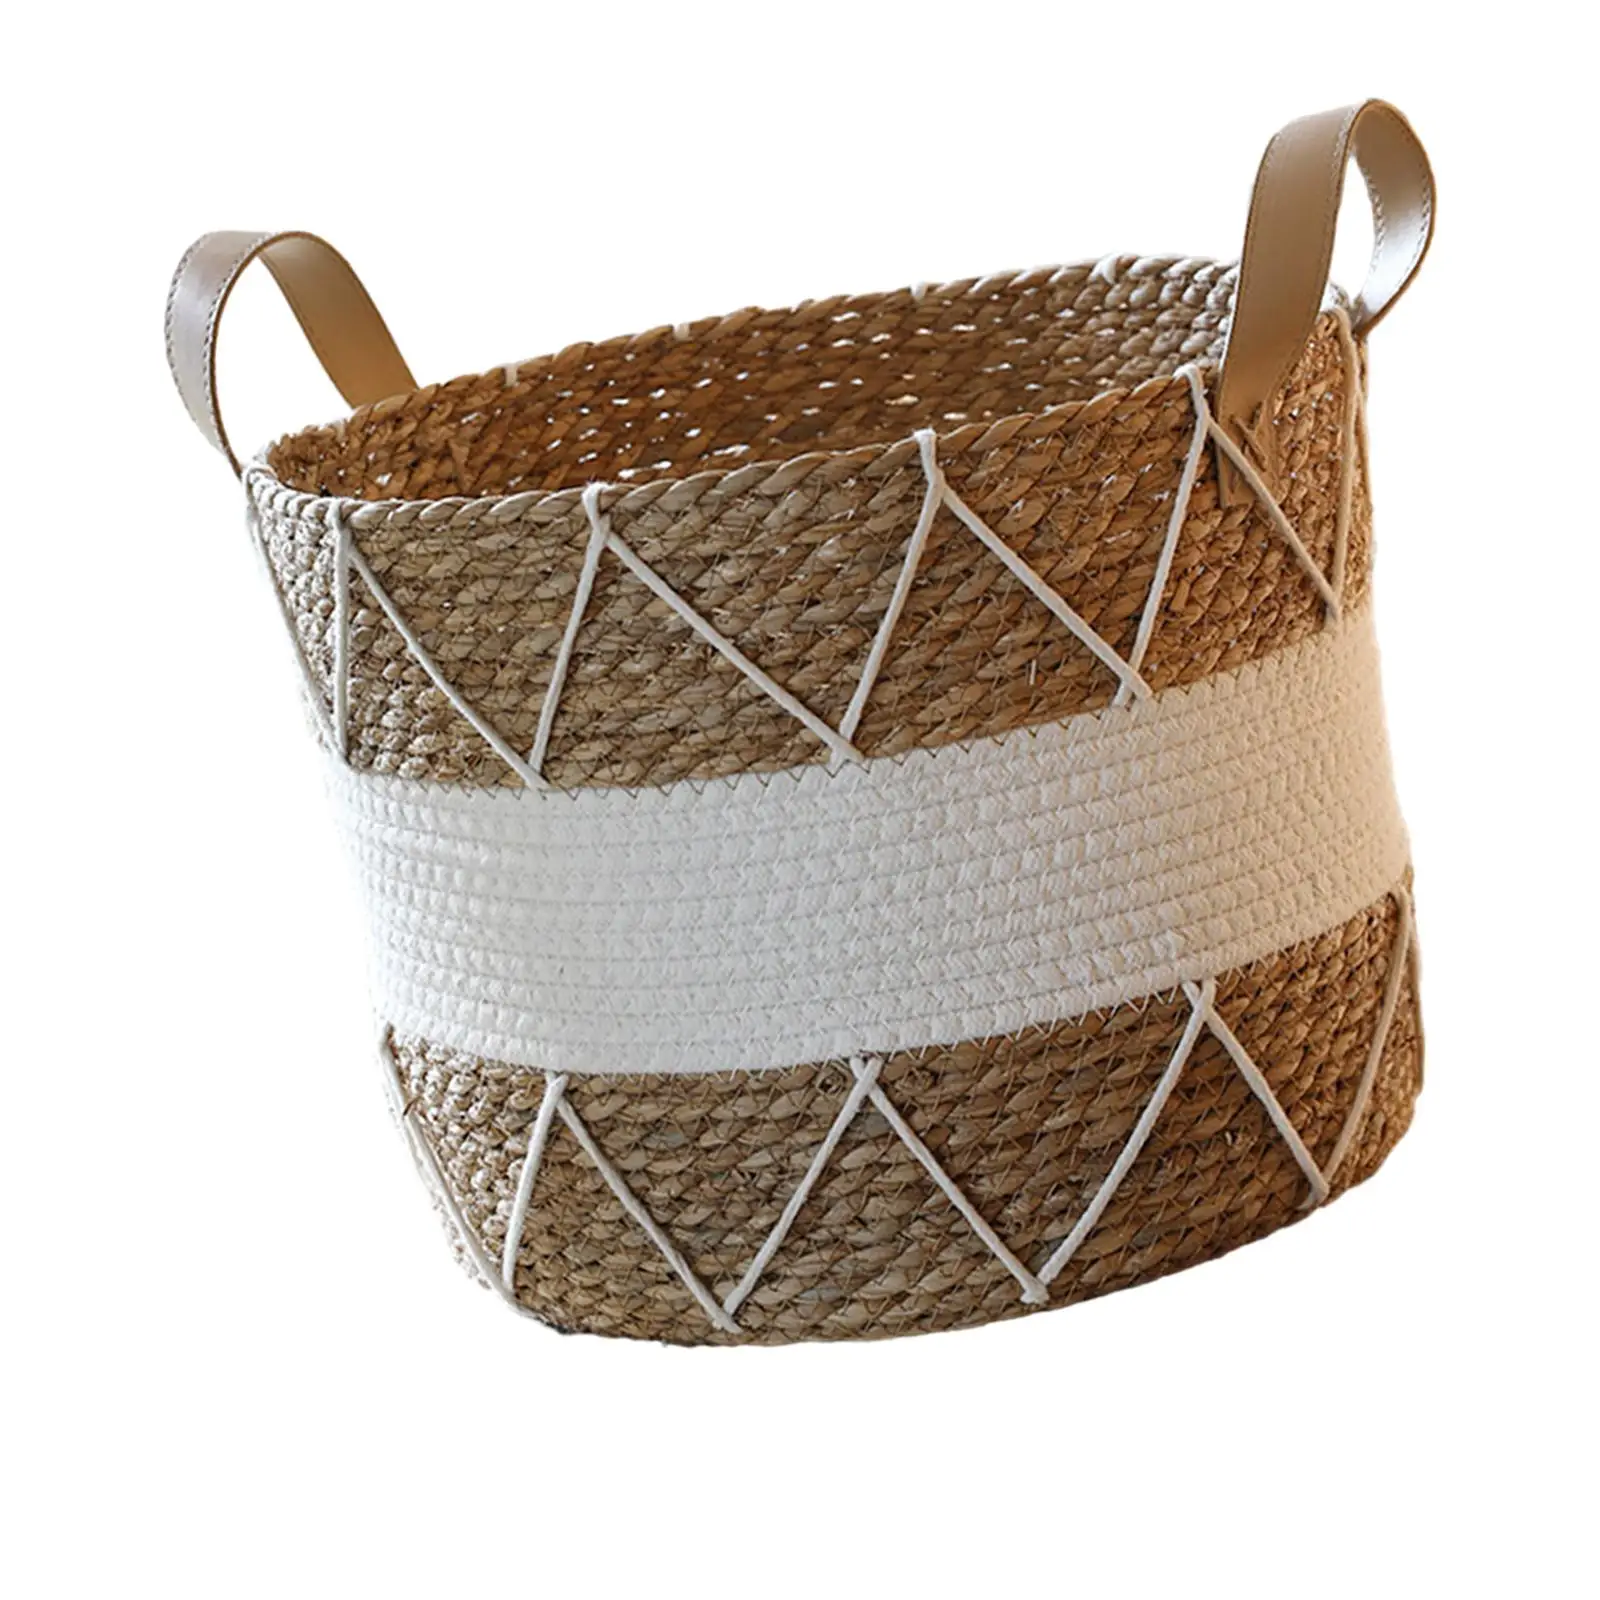 Dirty Clothes Laundry Basket Freestanding Woven Rope Laundry Basket Baby Toy Hamper for Socks Toiletry Pillows Clothing Shoes